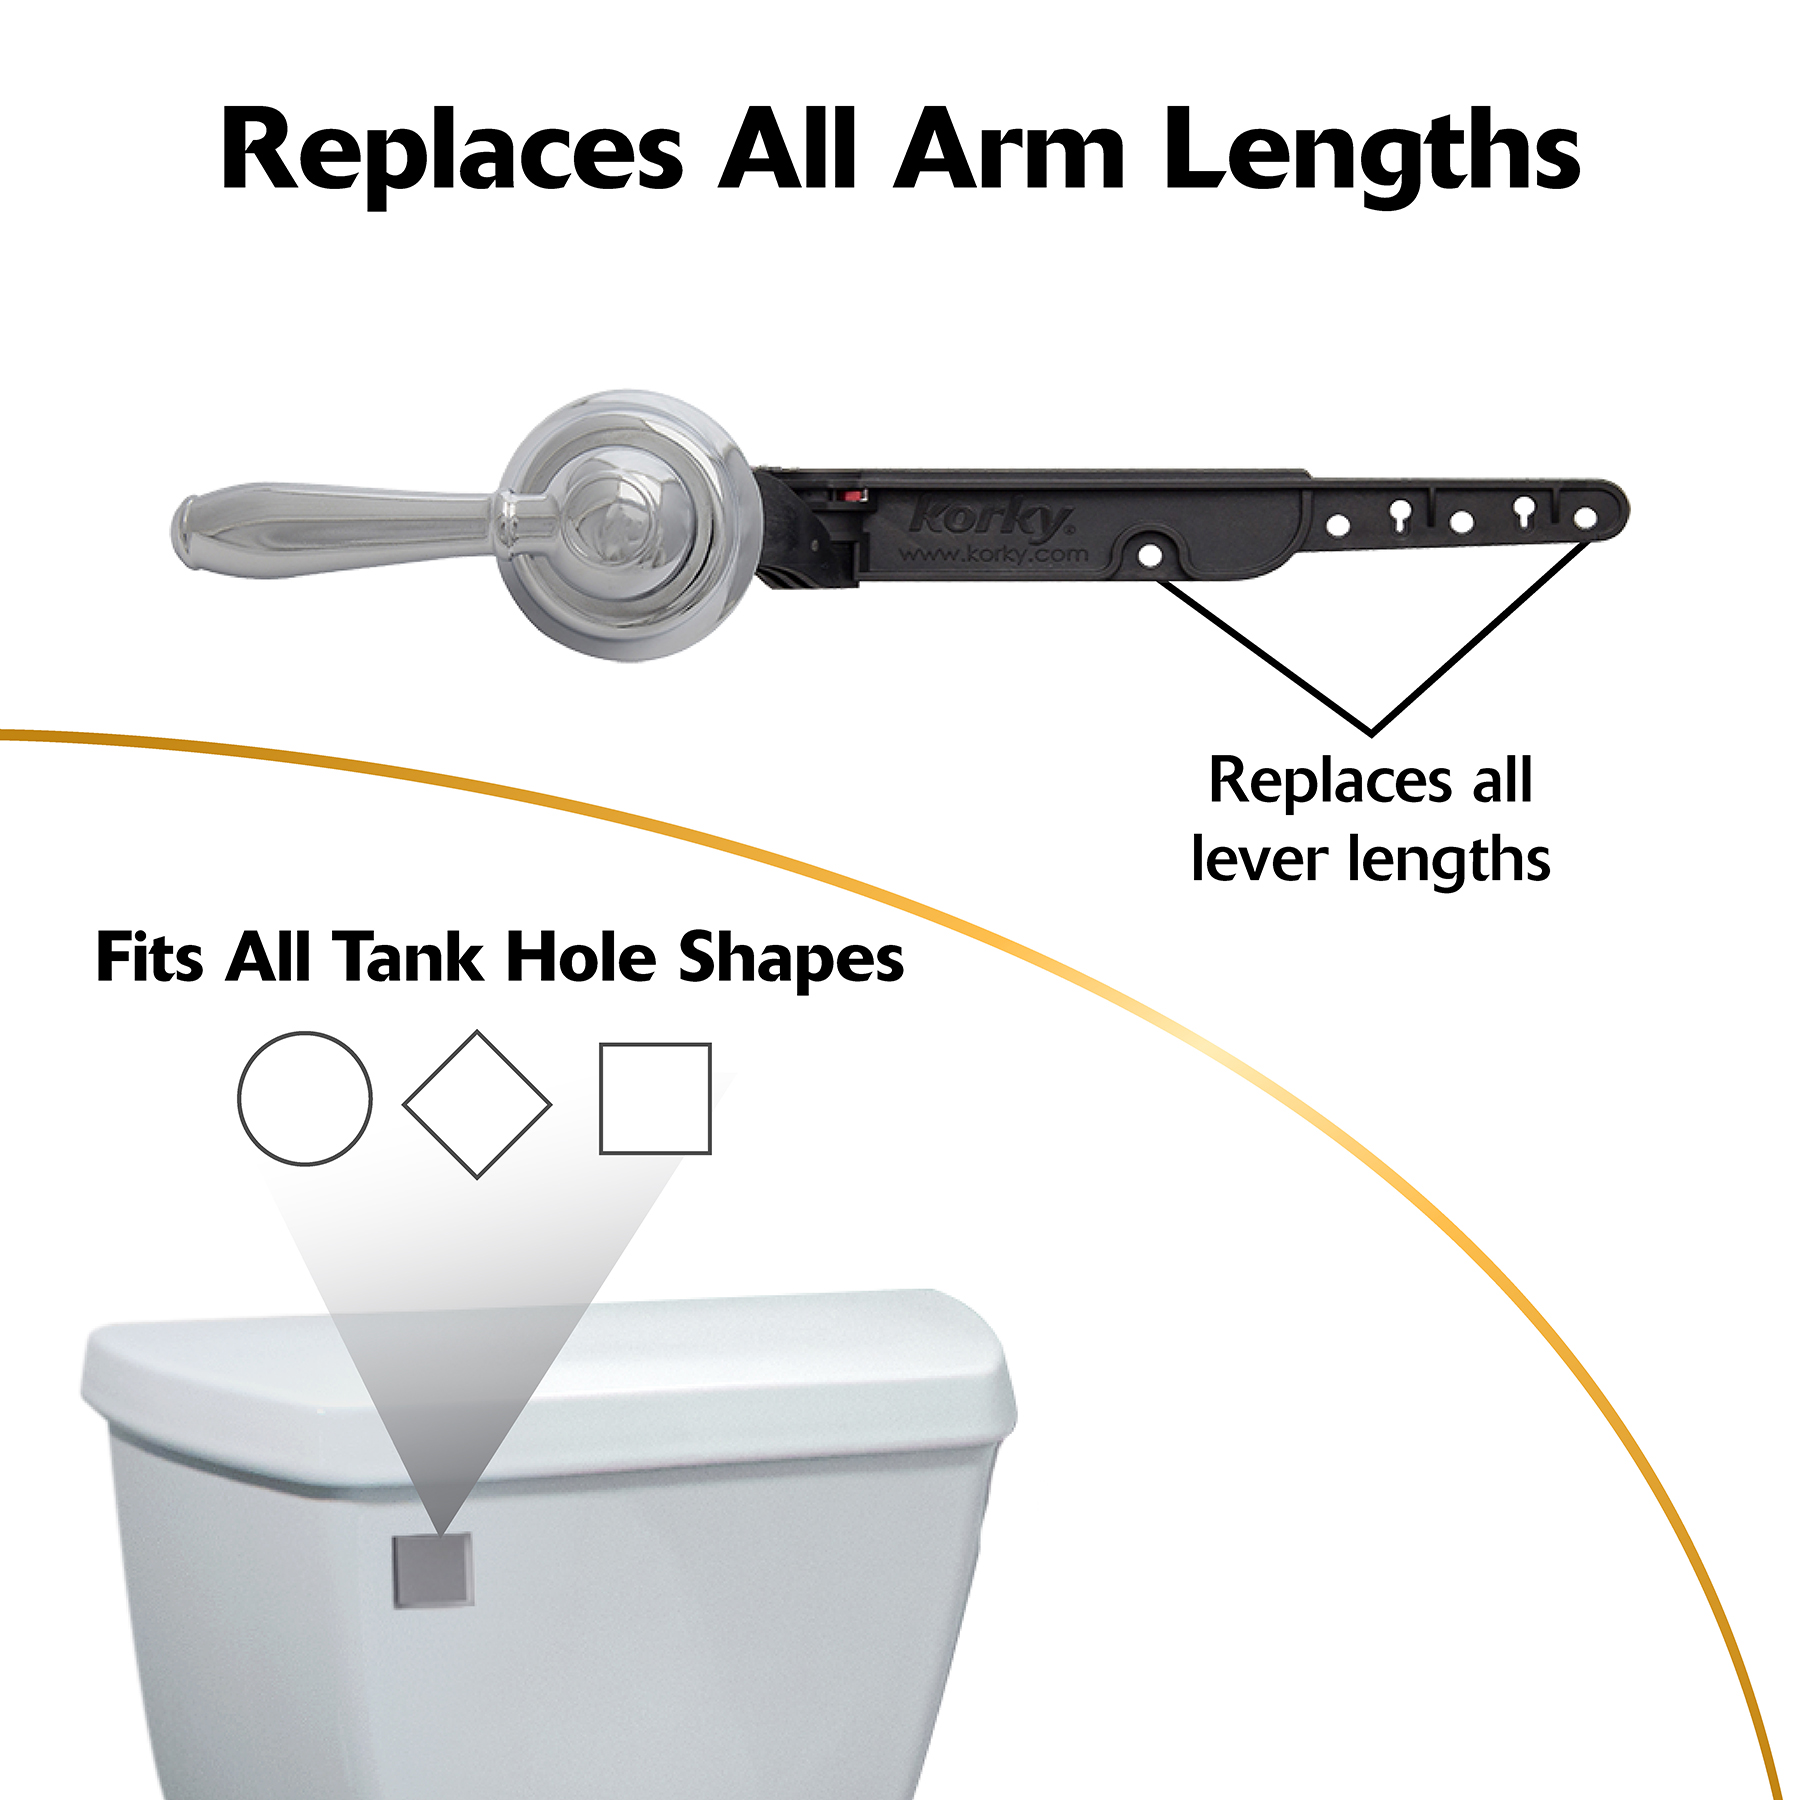 Korky StrongARM levers replace all arm lengths and fit all toilet tank hole shapes